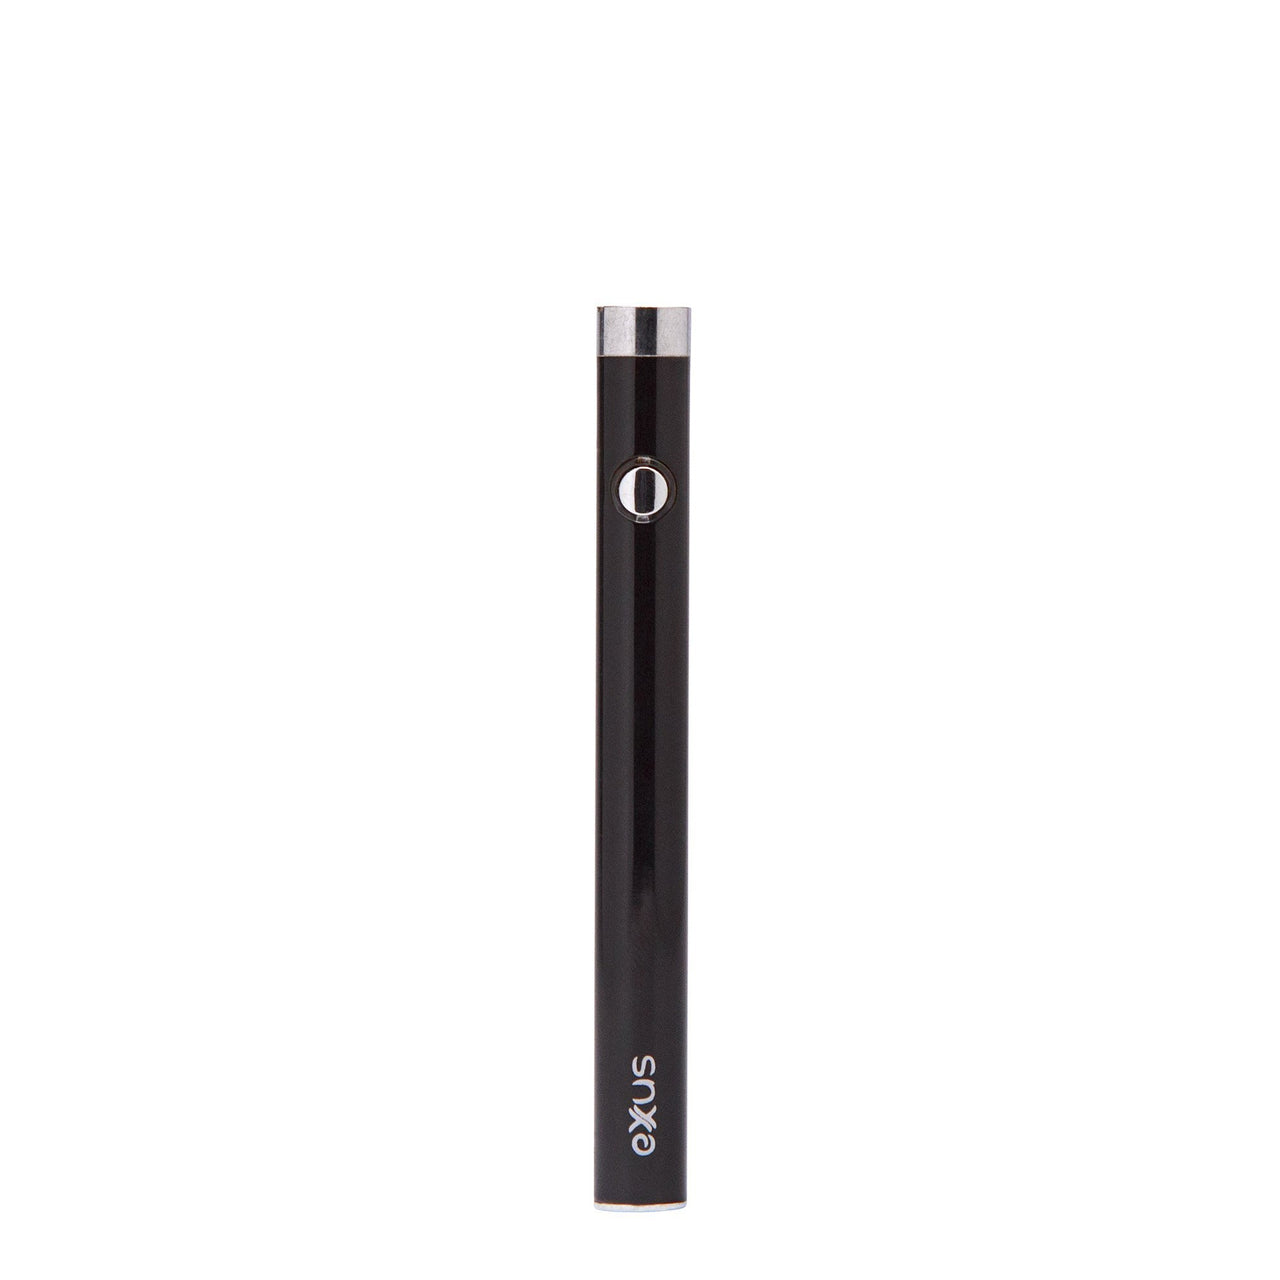 420 Science Dropdown Adapter / $ 19.99 at 420 Science